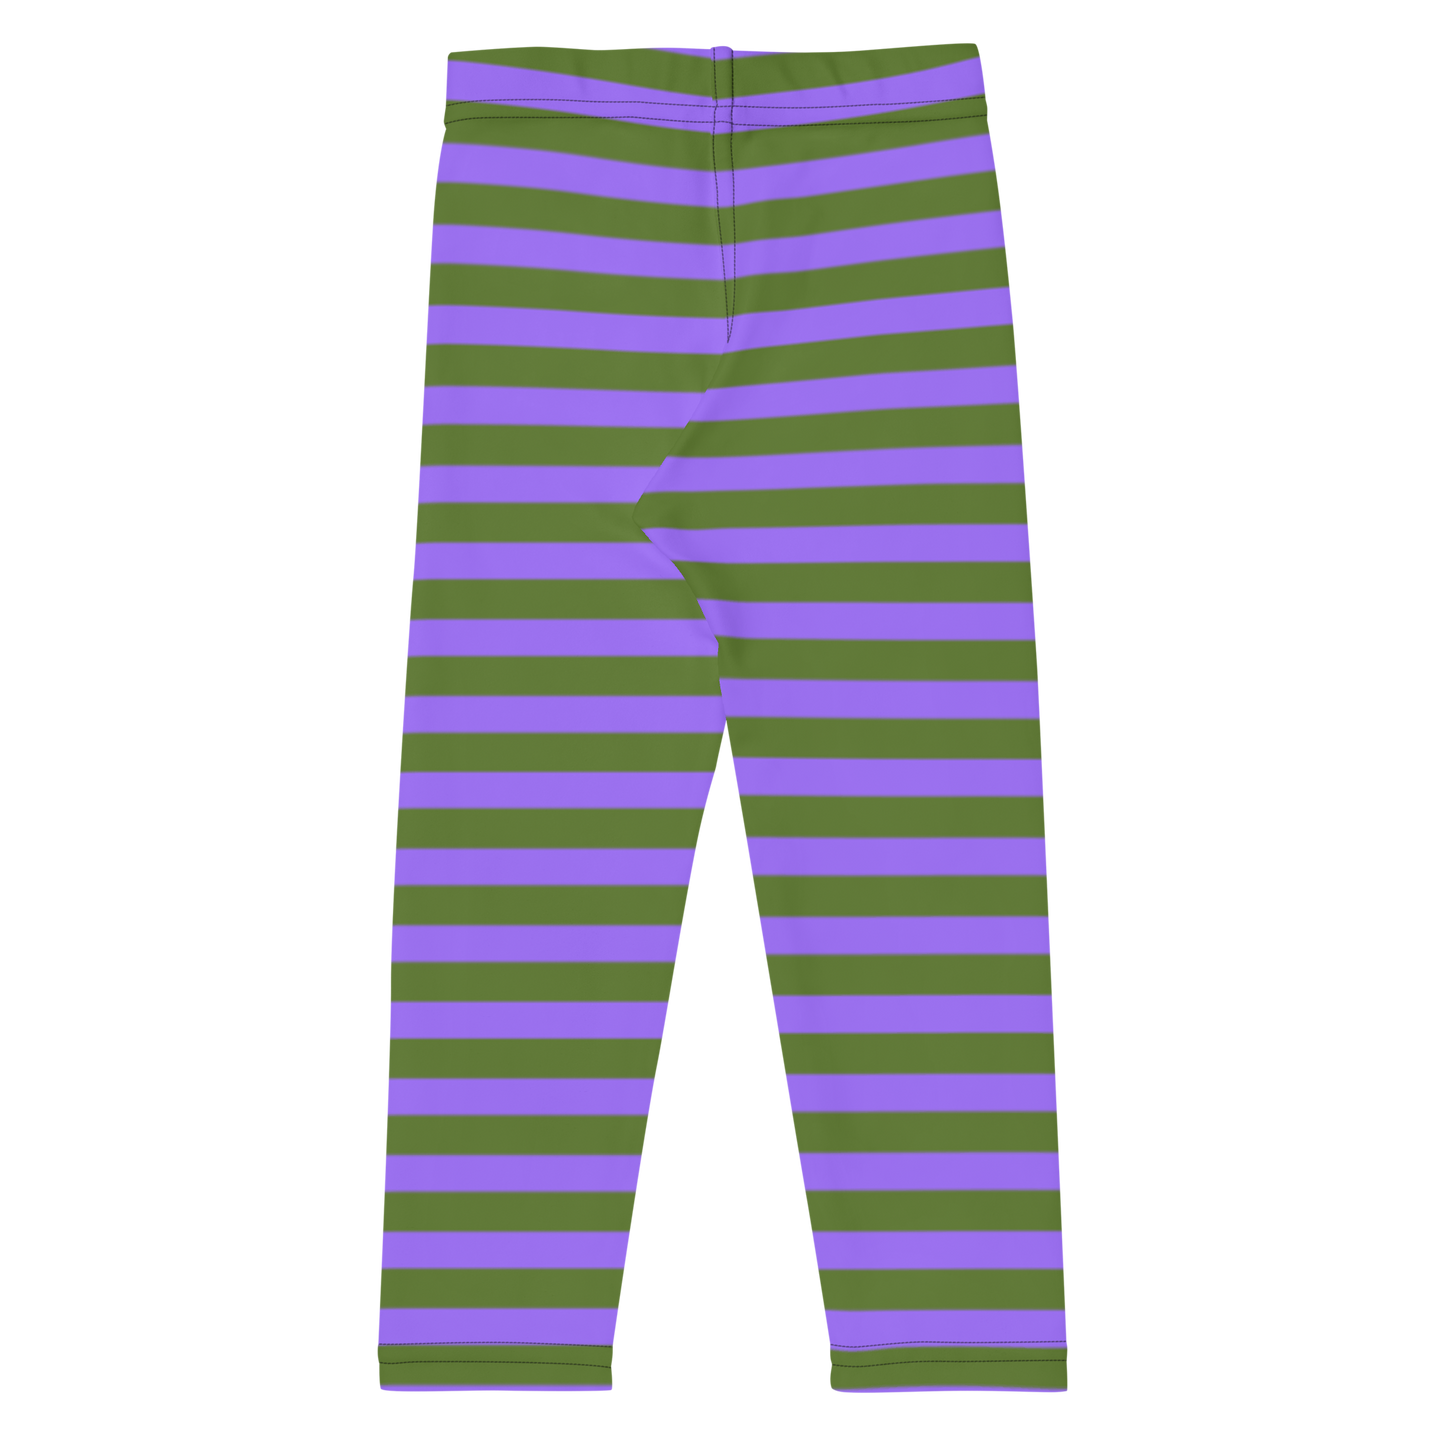 Purple and Green Striped Children’s Leggings, from the You are the Light Collection